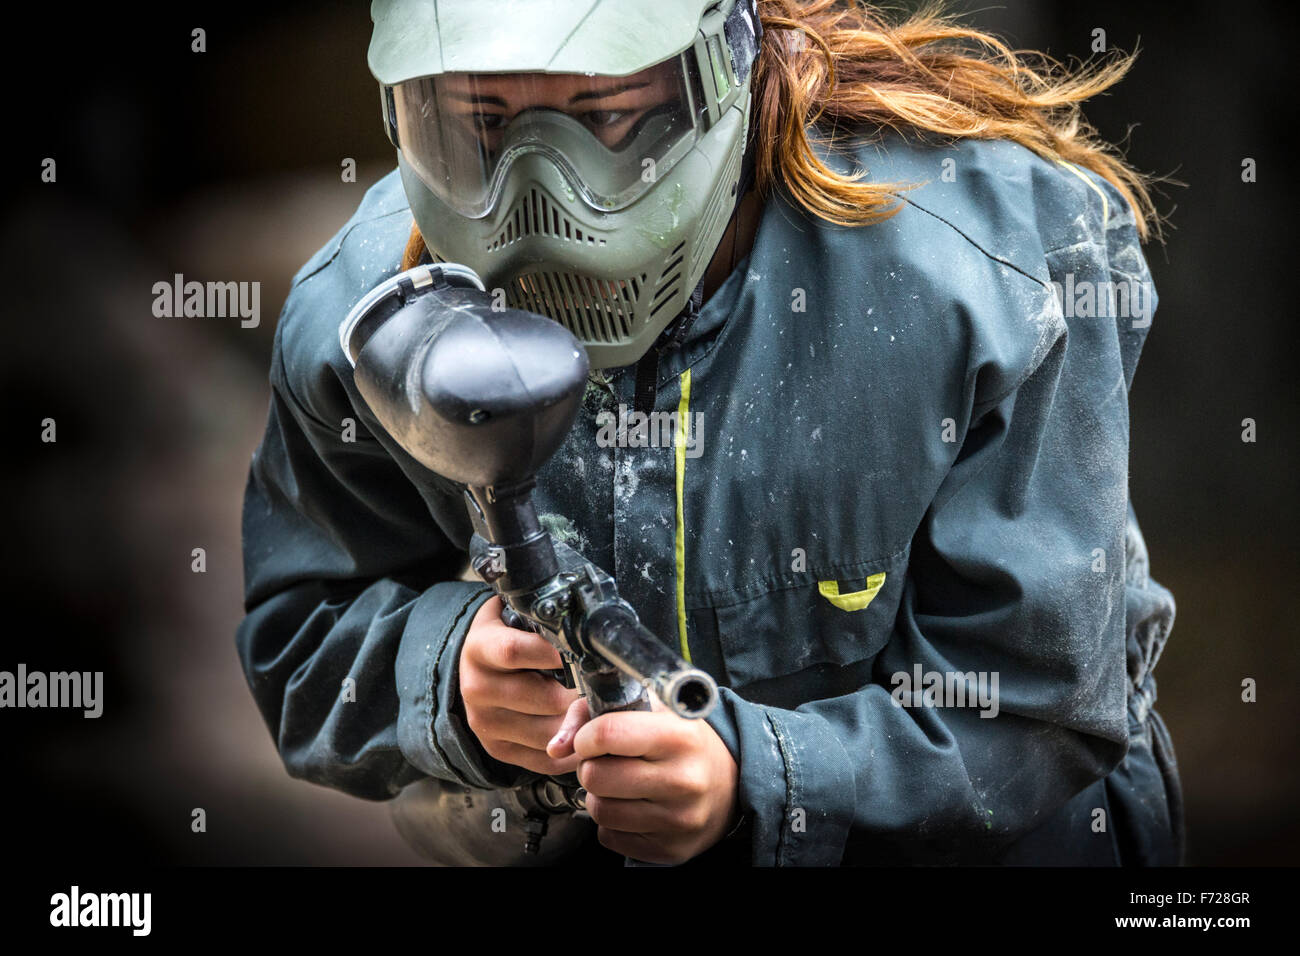 A paintball player girl at work. Jeune fille joueuse de paintball en action. Stock Photo